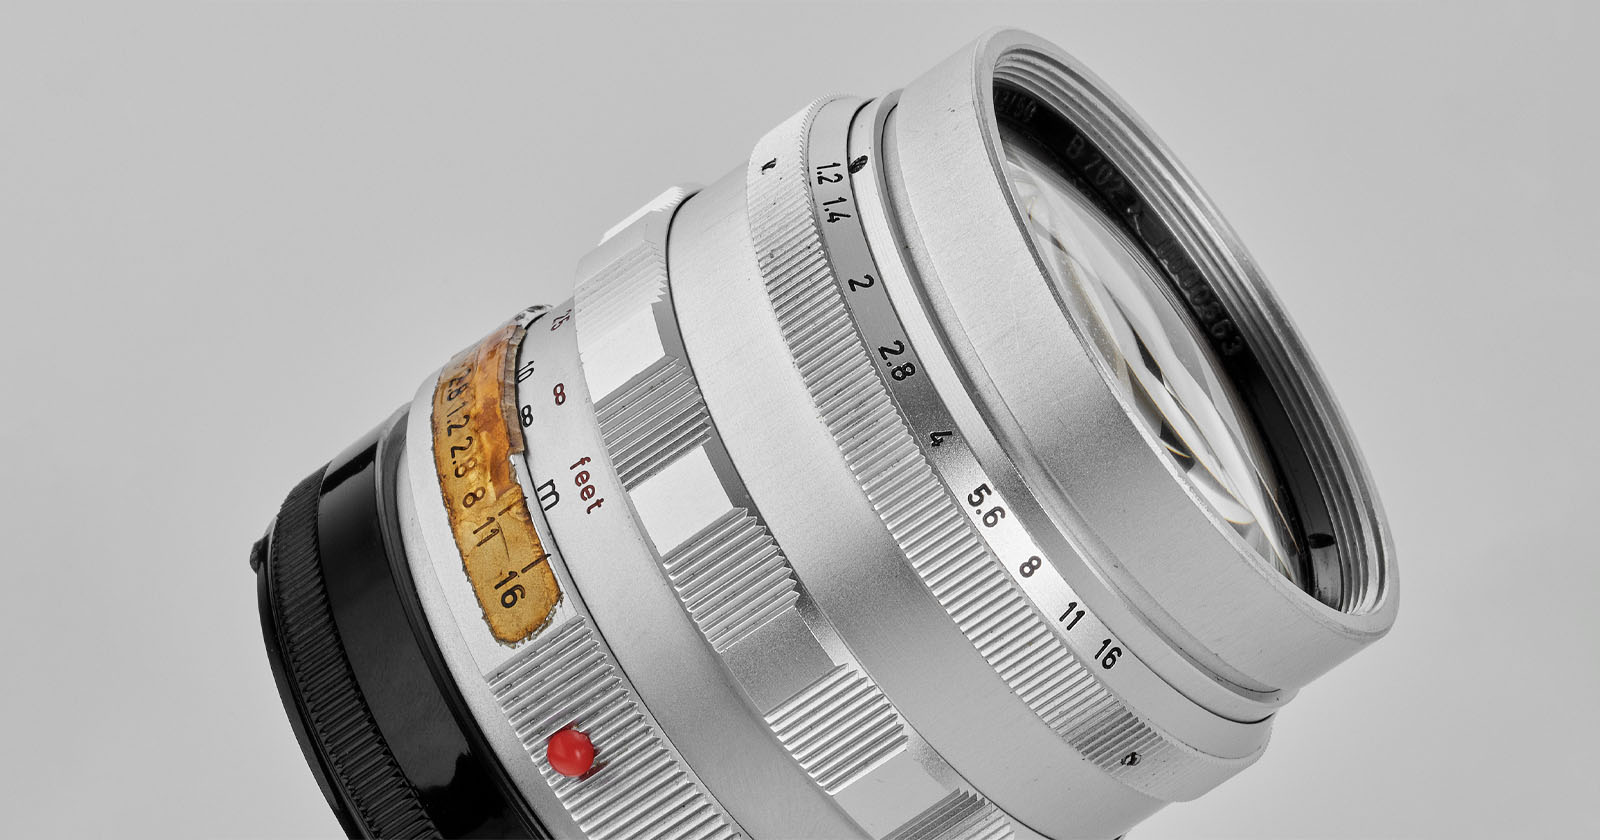 Prototype 1964 Leica Noctilux 50mm f/1.2 is Expected to Sell for $500K